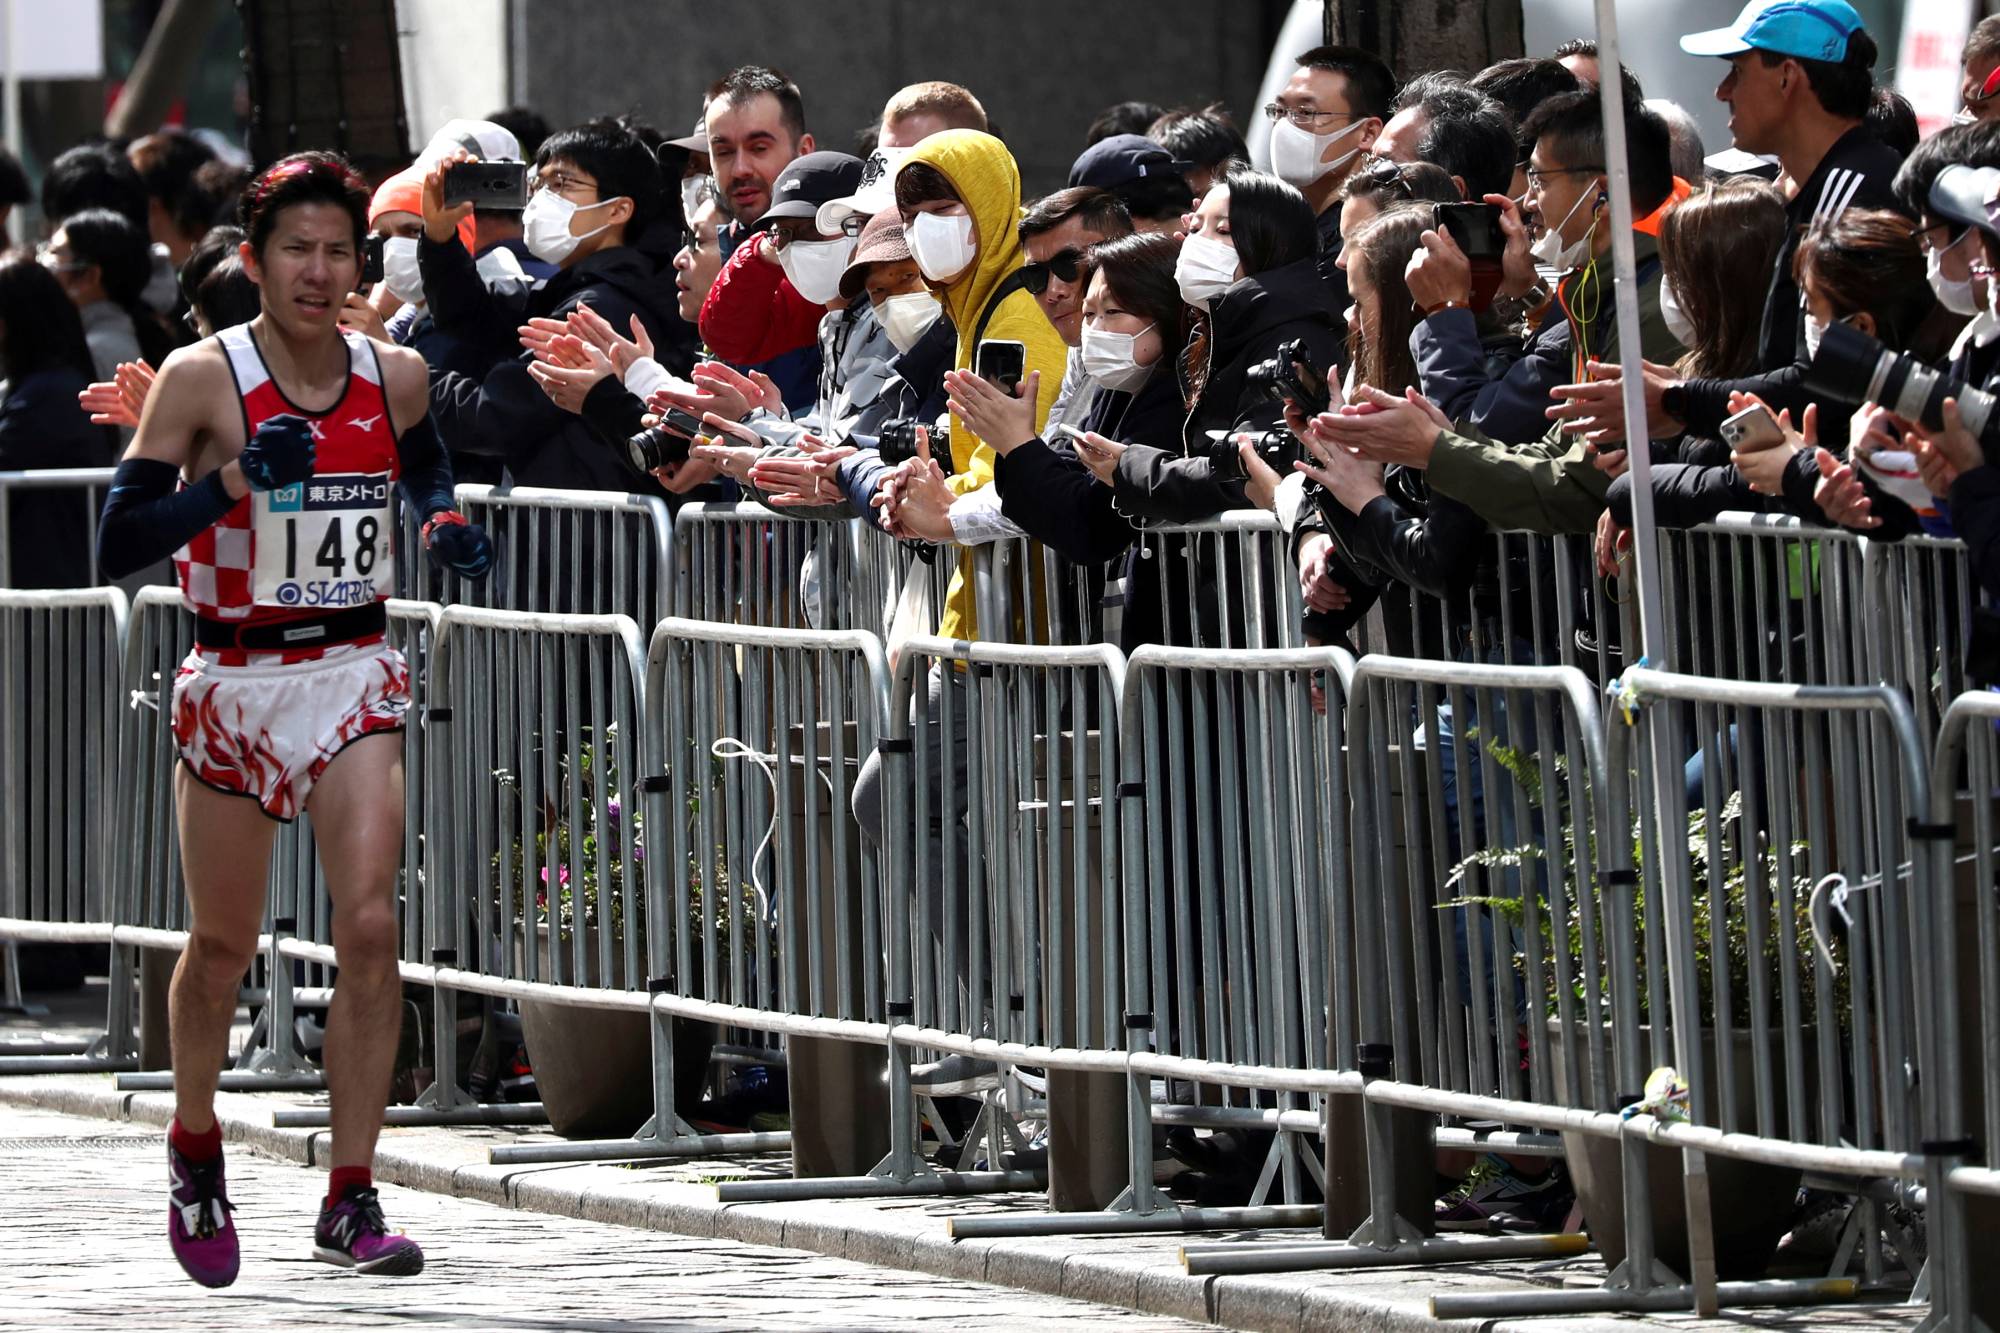 The Tokyo Marathon is one of the six World Marathon Majors. This year's races in Boston, Berlin, Chicago and New York have all been canceled, while last weekend's London Marathon featured only elite runners after being postponed from April. | REUTERS 